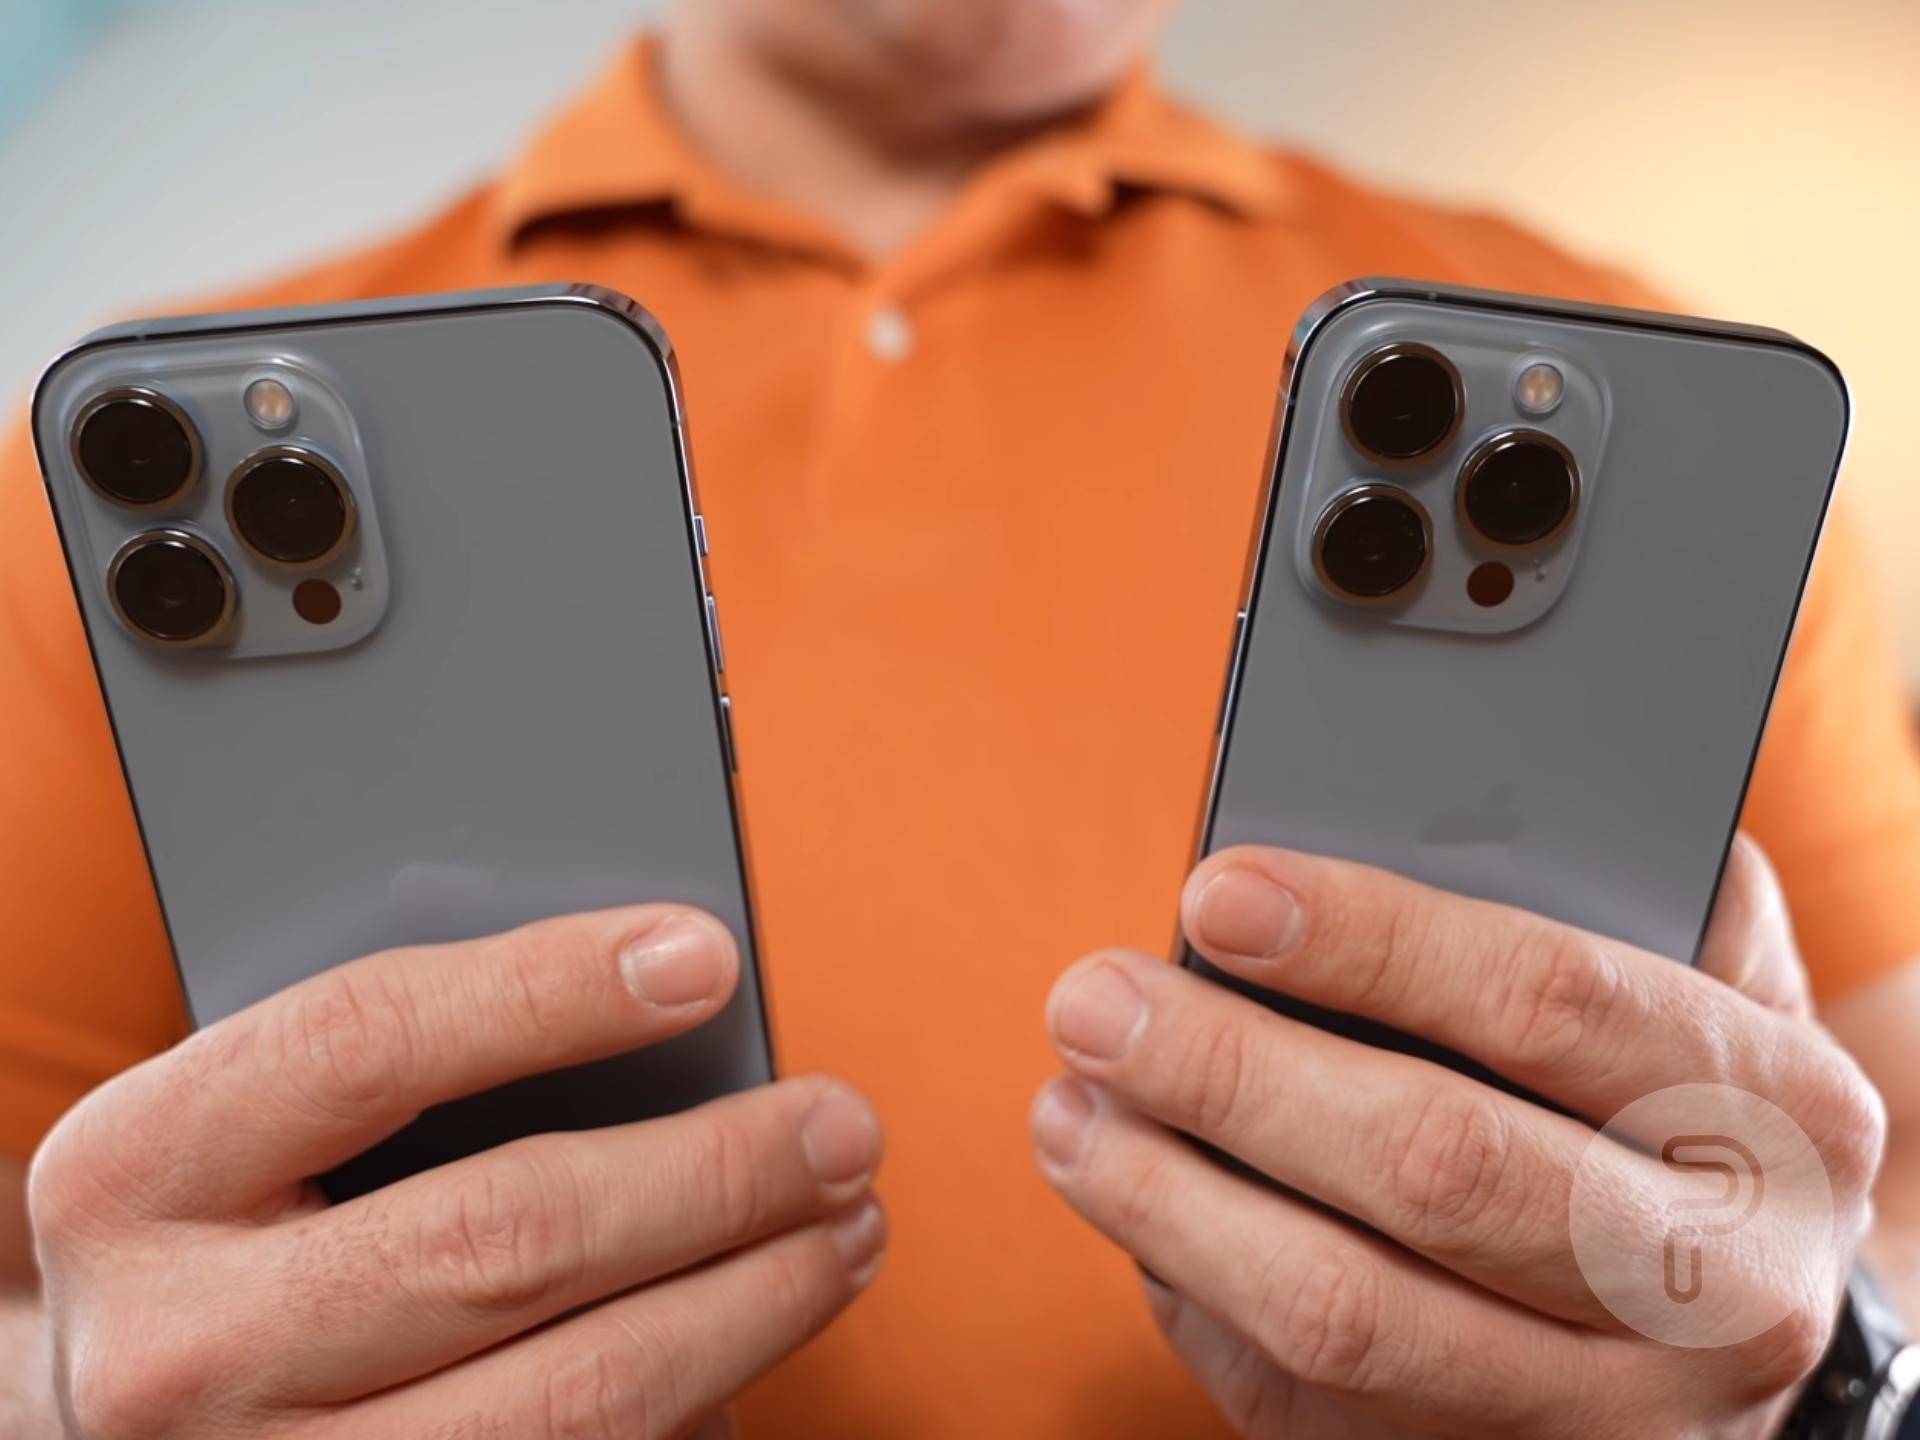 iPhone 13 Pro and iPhone 13 Pro Max held side by side